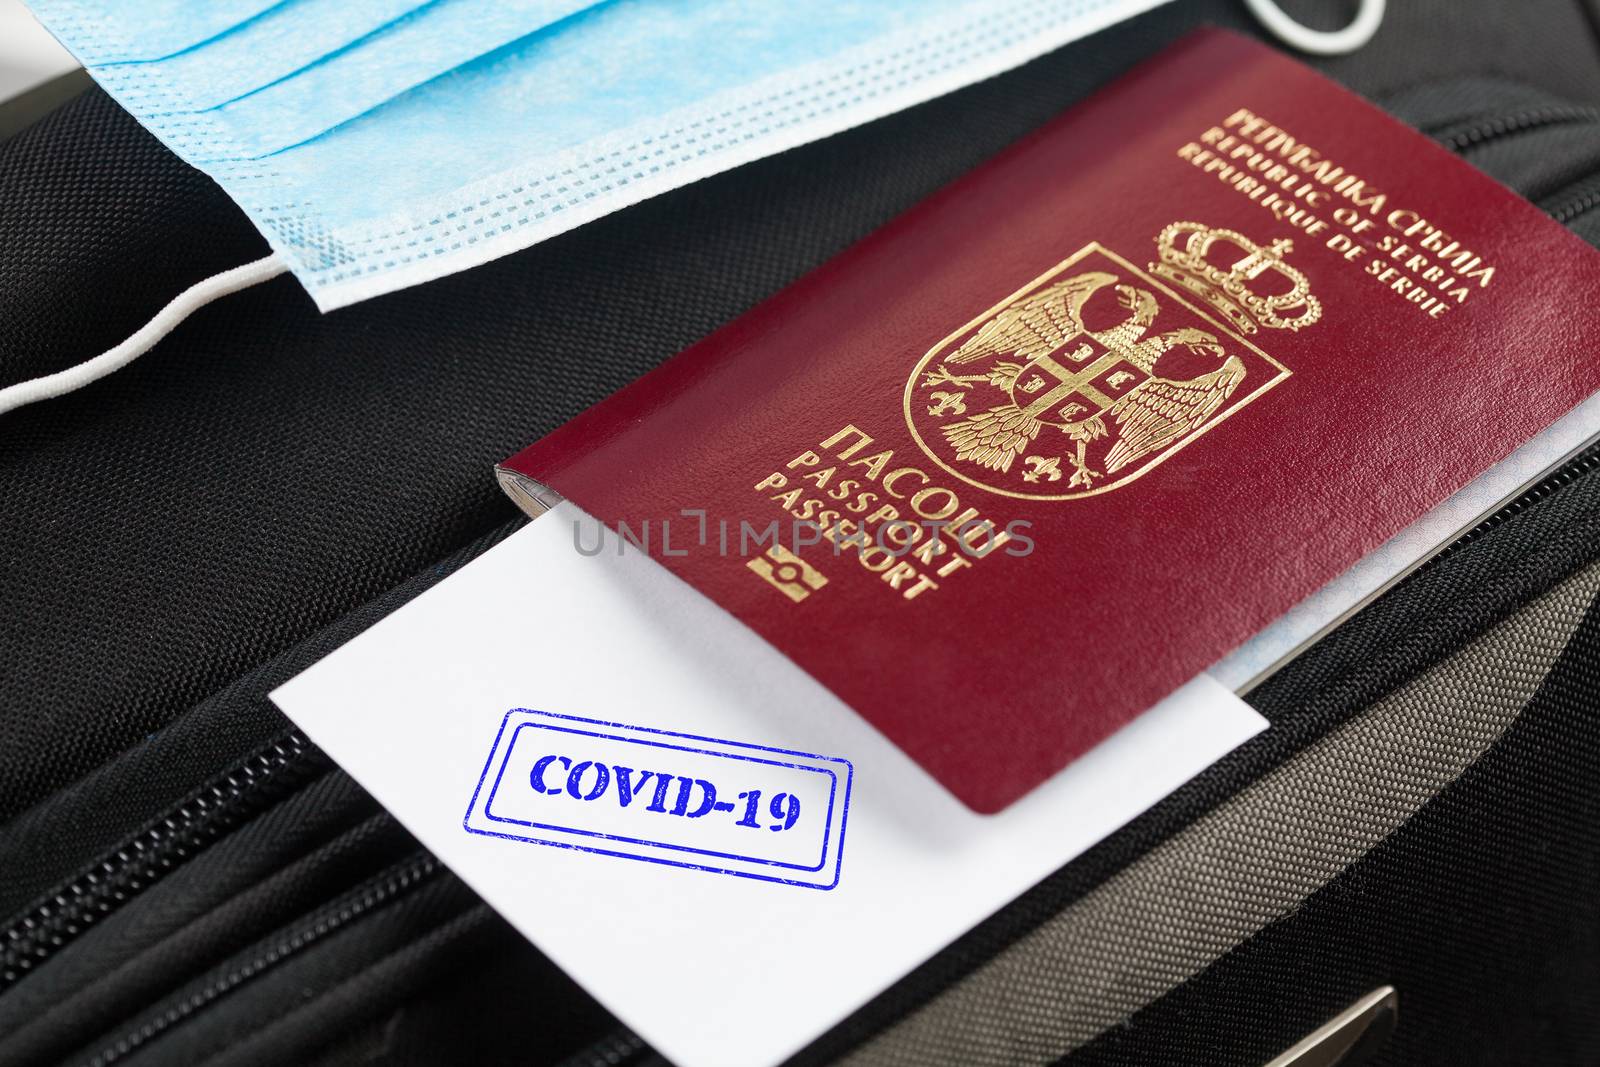 Passport and medical face mask on a suitcase, paper with COVID-19 stamped onto it, point of care testing at airport or border crossing facility,medical security health check to determine immunity